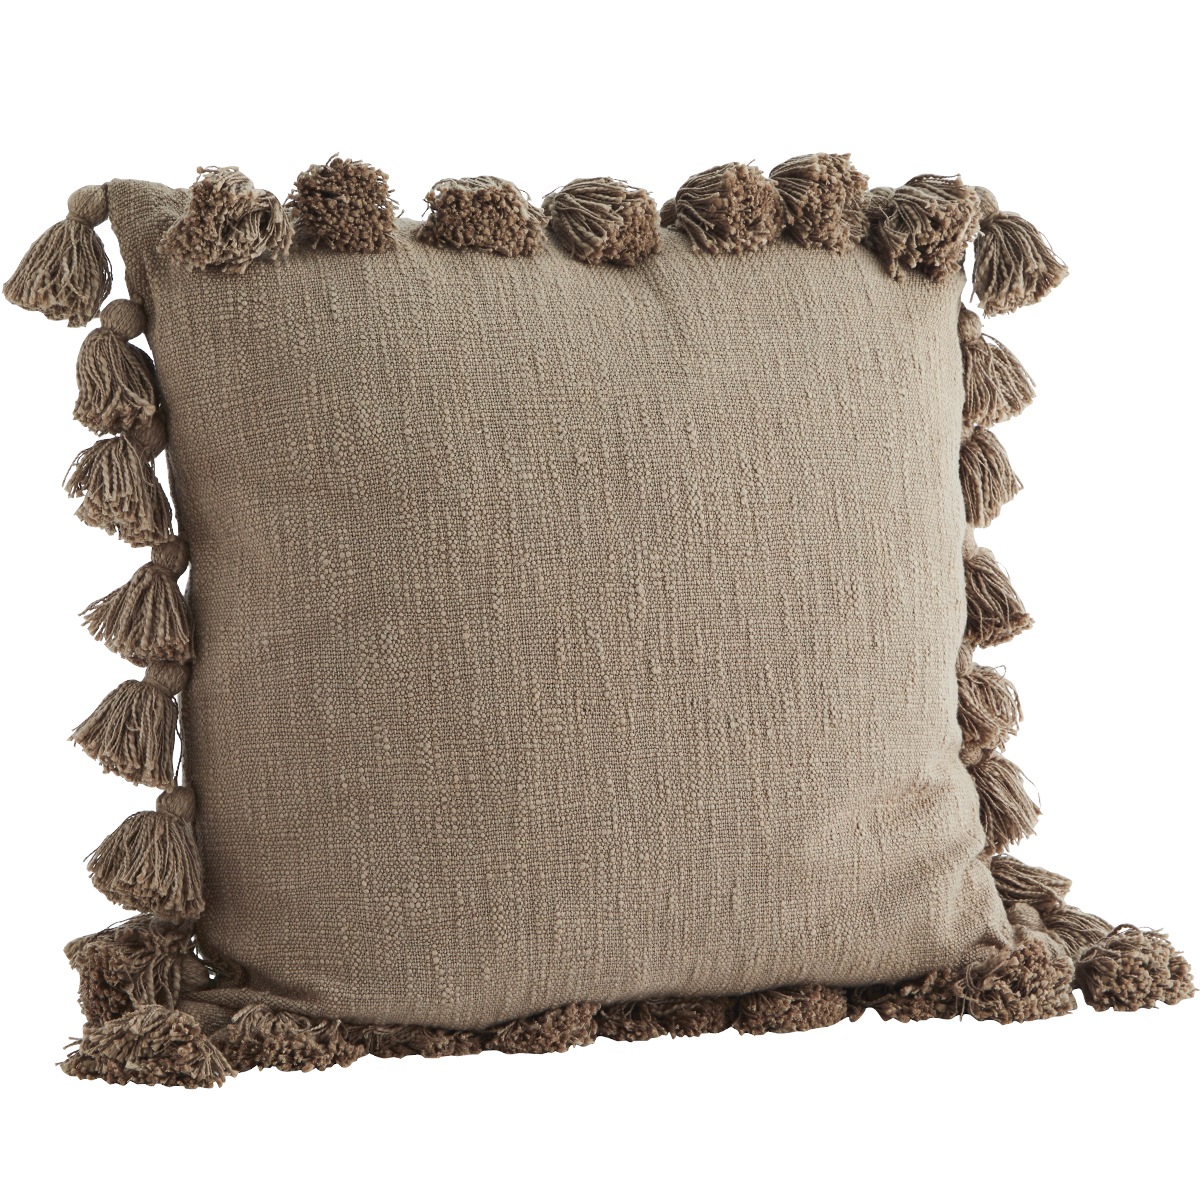 Cushion cover with tassels 60x60 cm, Greige